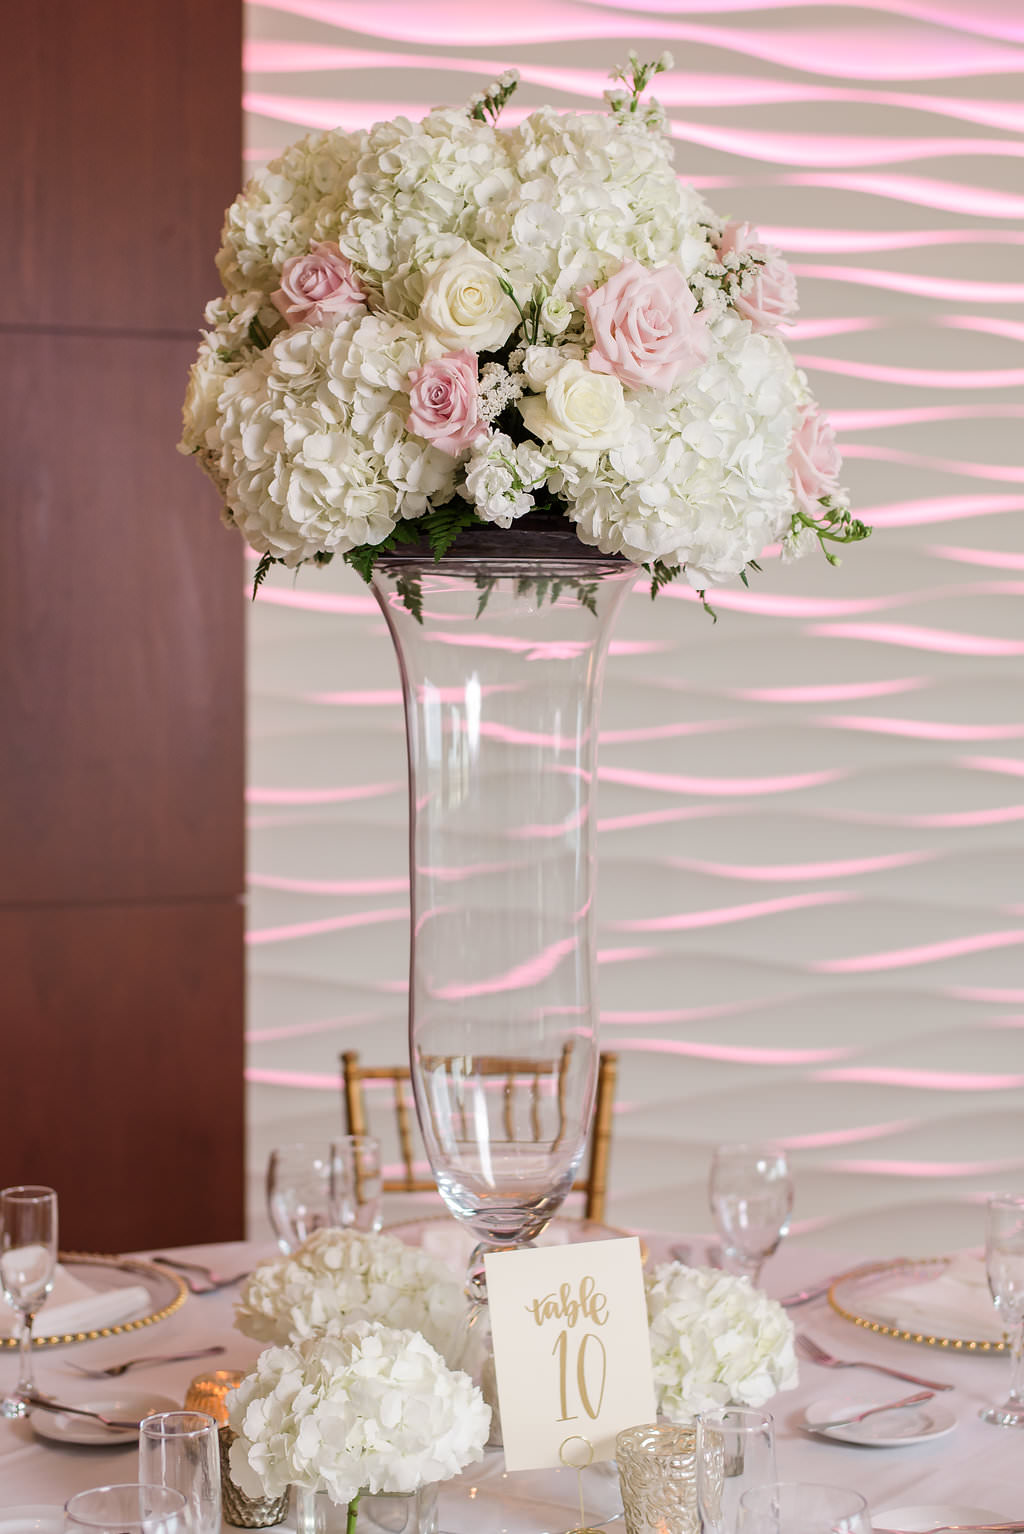 White and Gold Wedding Reception with Tall White Hydrangea, Rose, and Blush Pink Rose Centerpiece in Glass Vase, and Stylish Gold Printed Table Number on Square White Paper